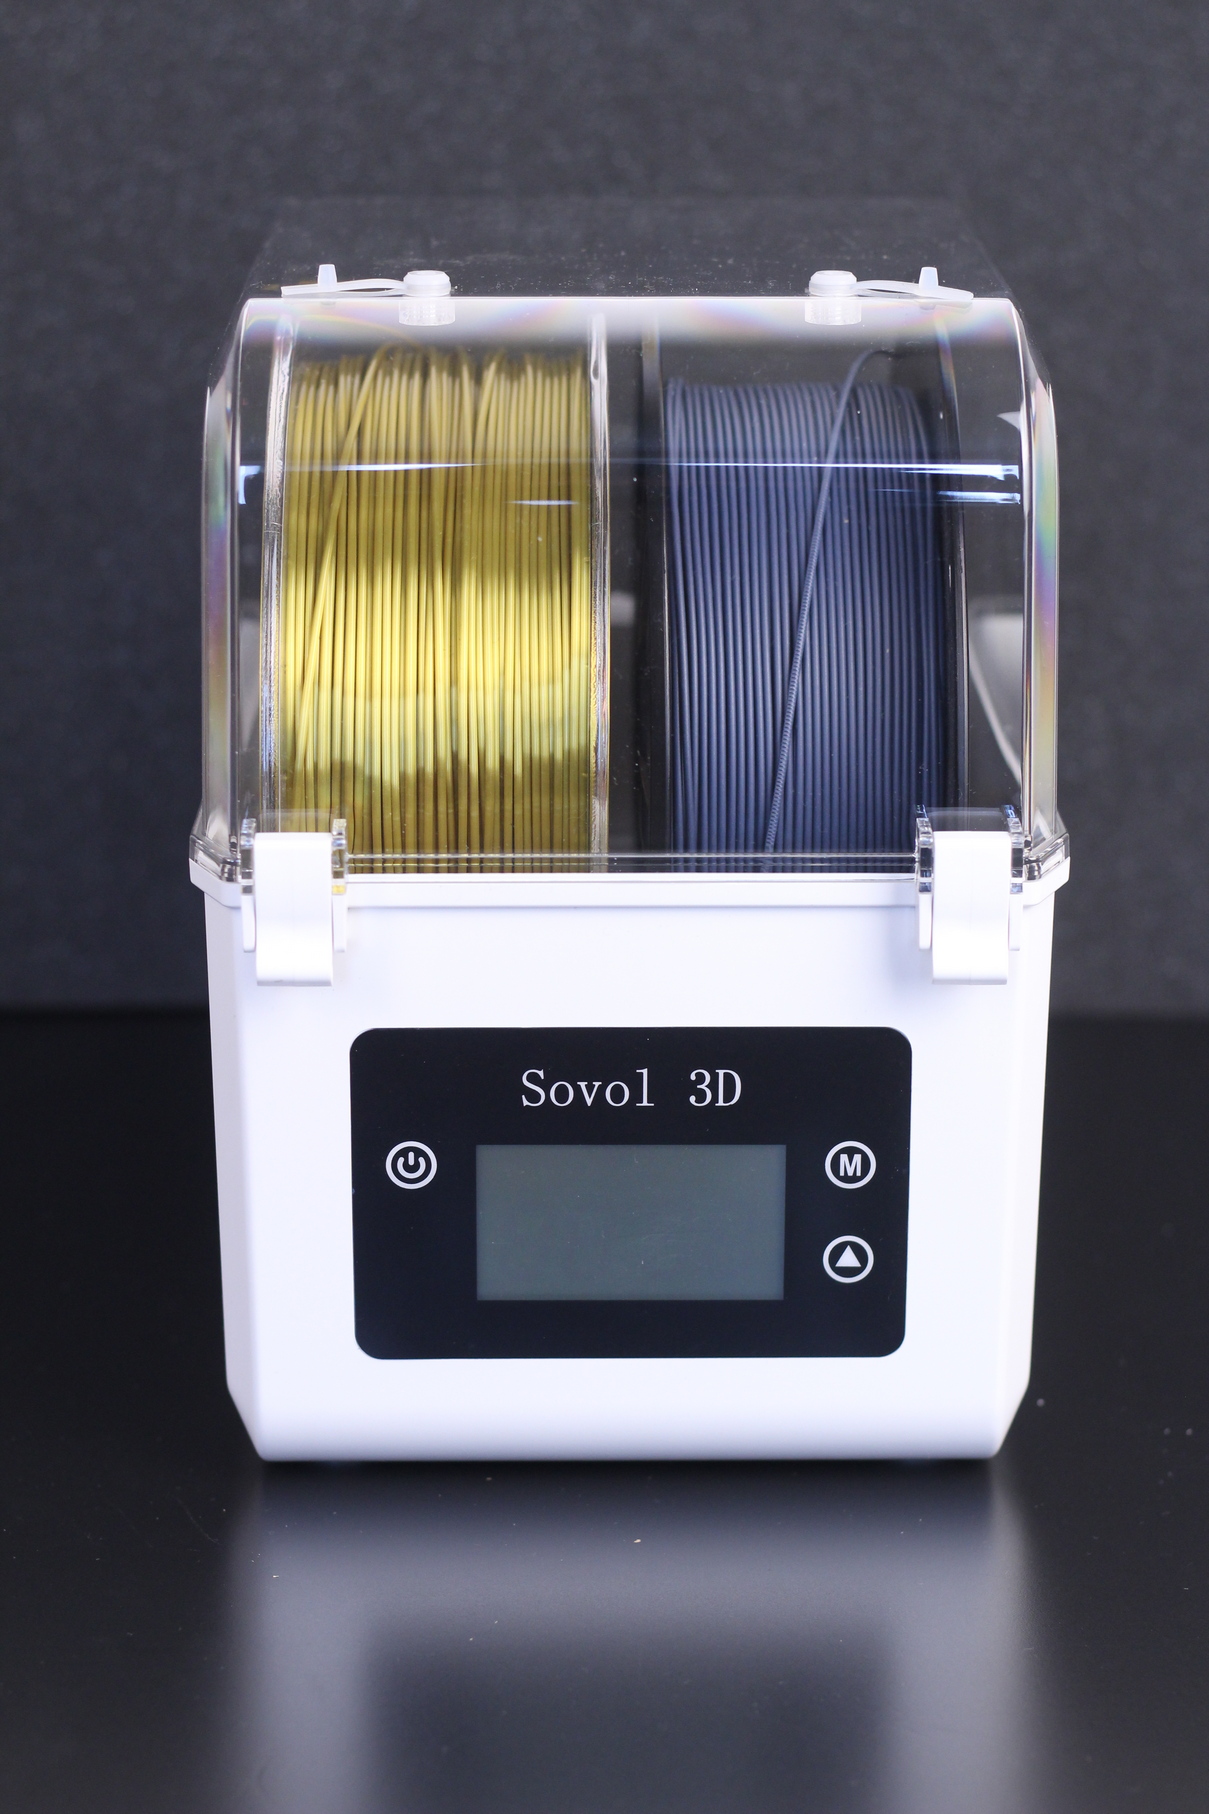 Sovol Filament Drier Spool Compatibility 2 | Sovol Filament Dryer Review: Does it really work?